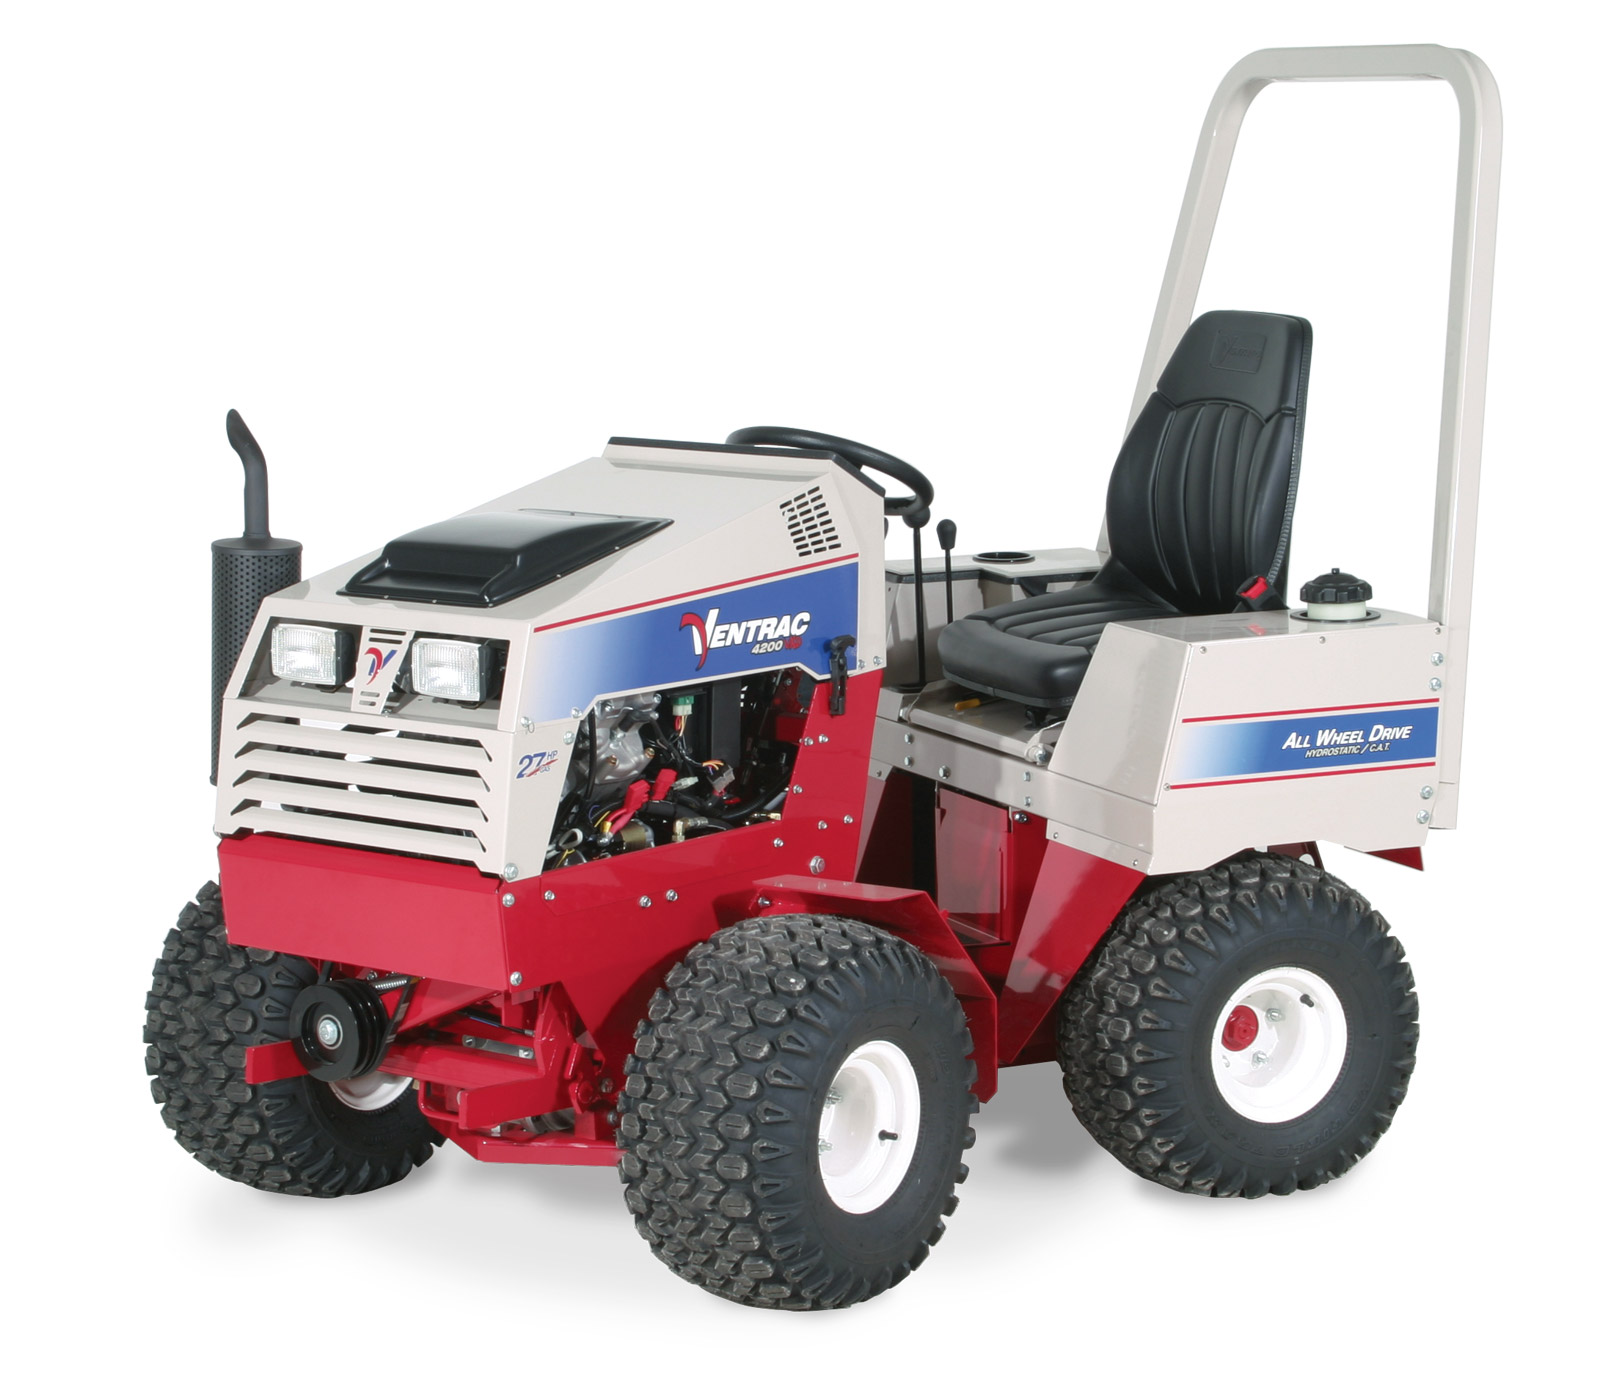 Enlarge Picture / Press Link · Ventrac 4000 series